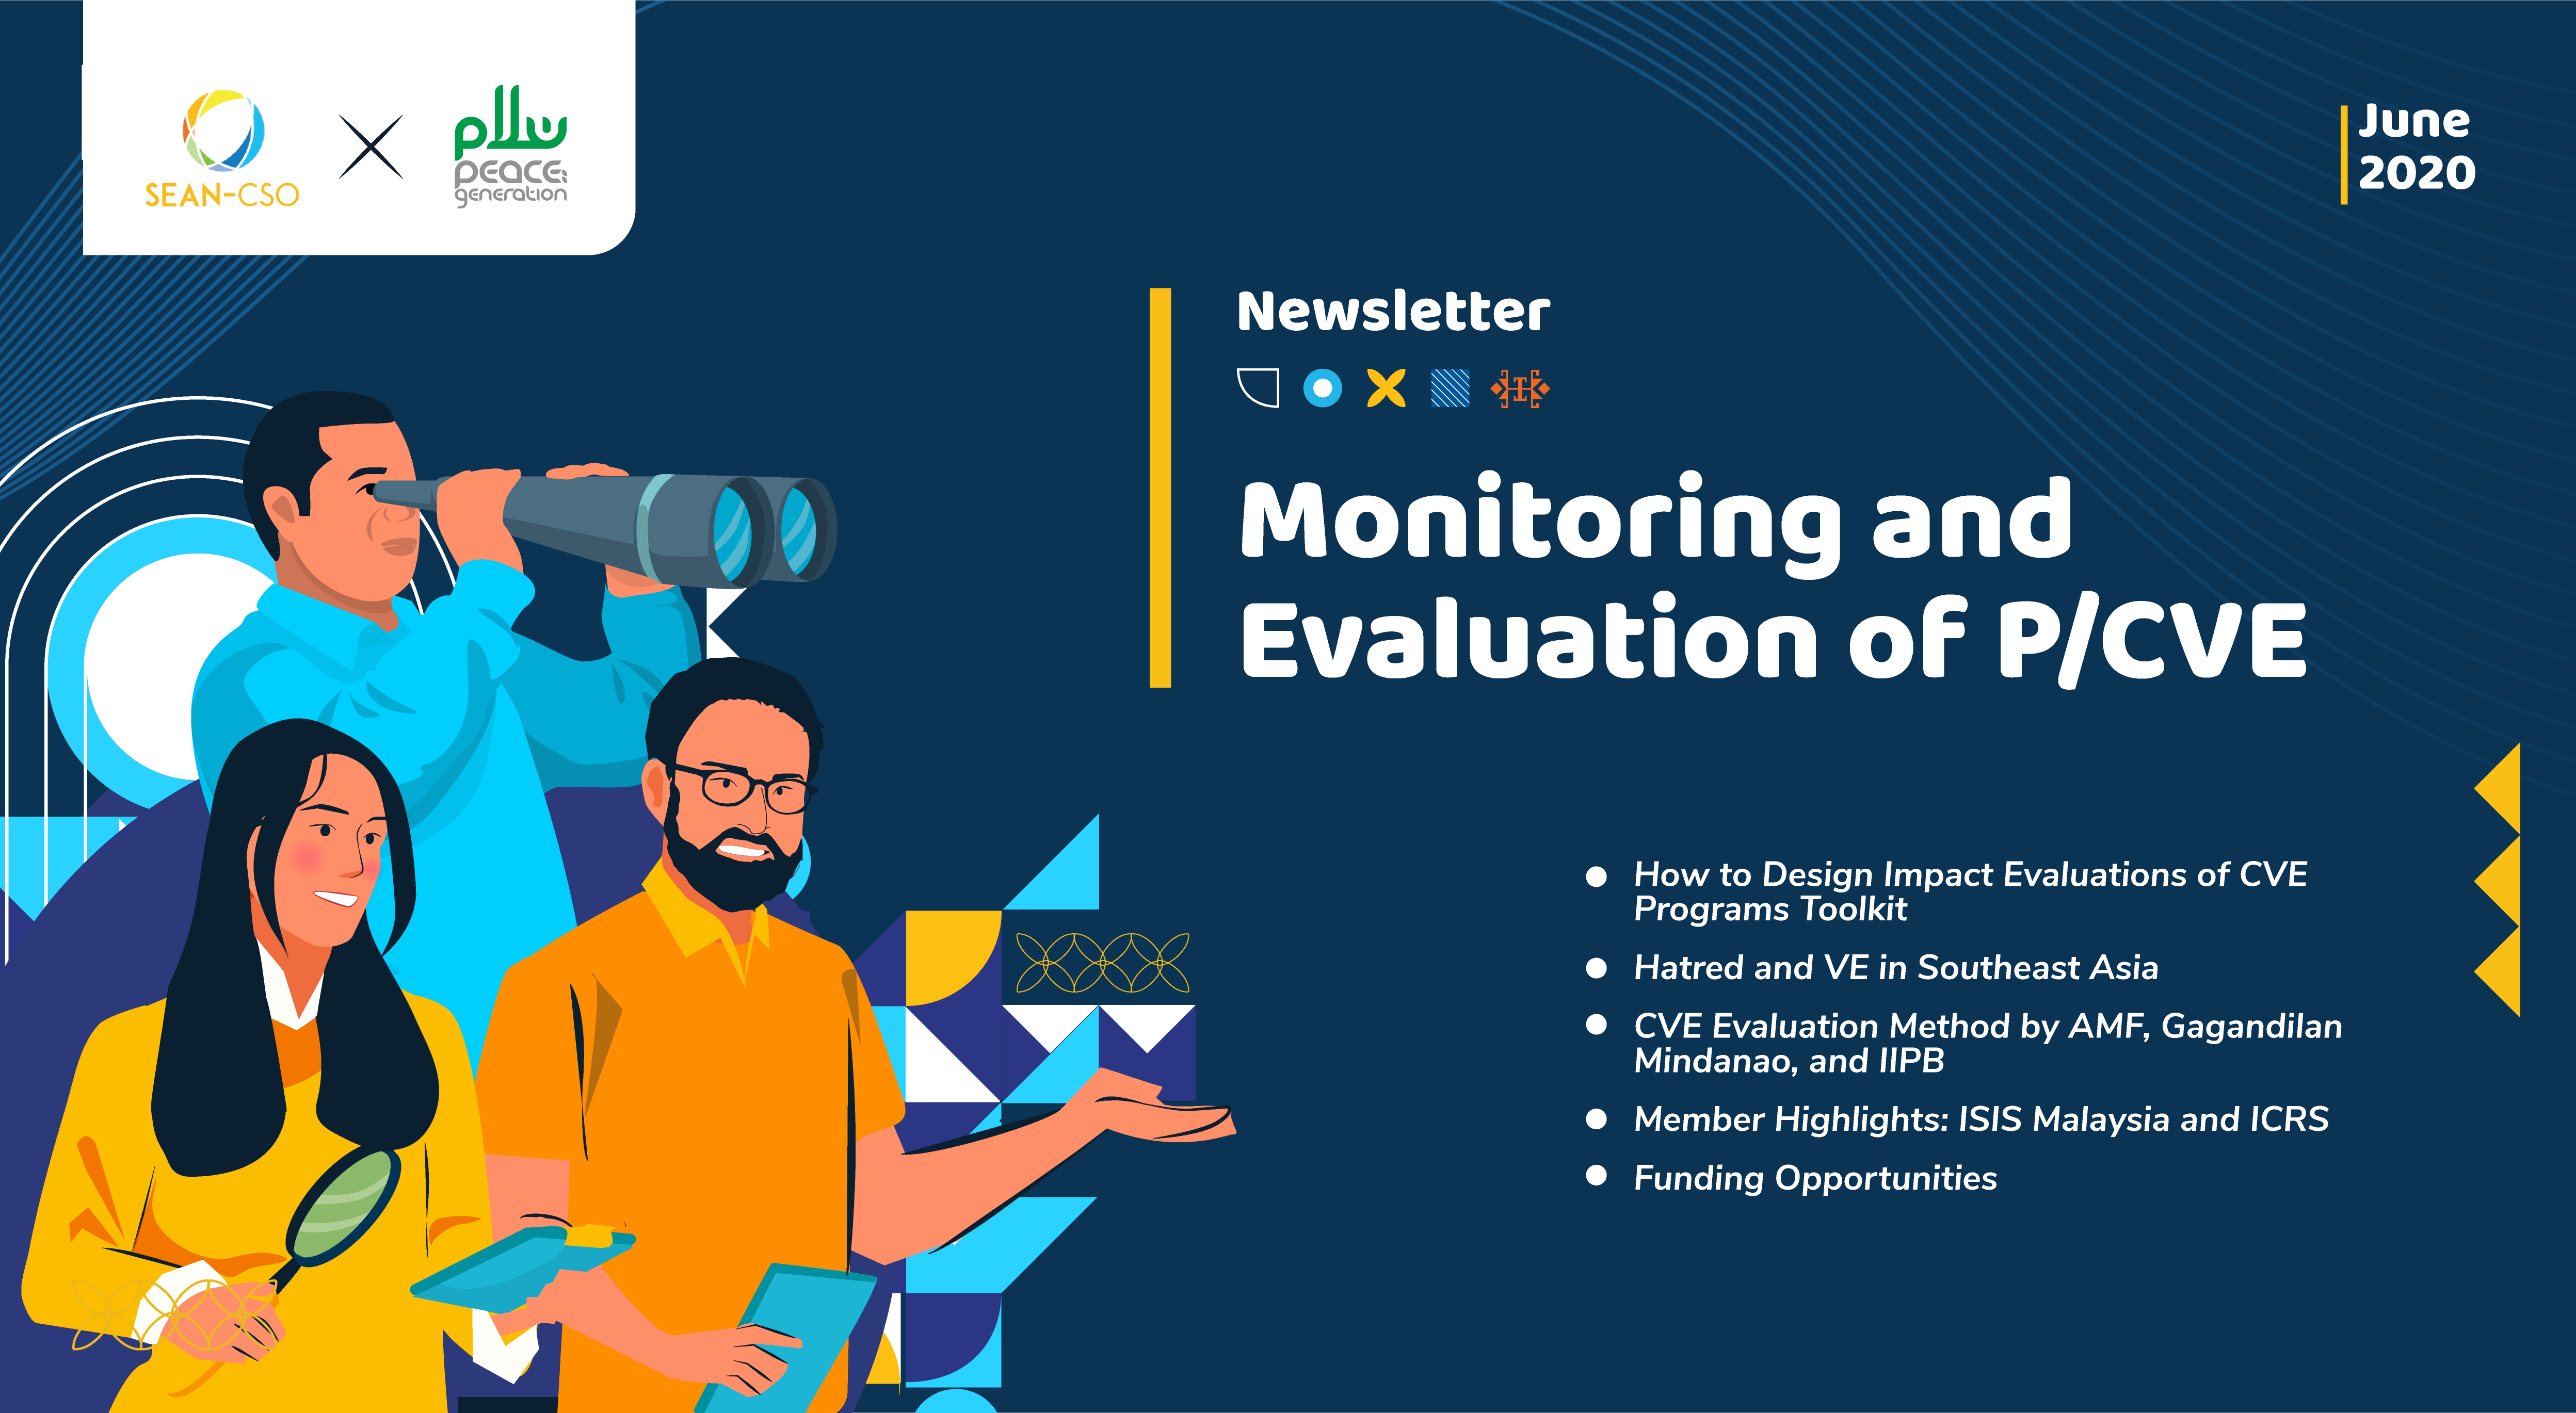 [Newsletter] June 2020: Monitoring and Evaluation of P/CVE